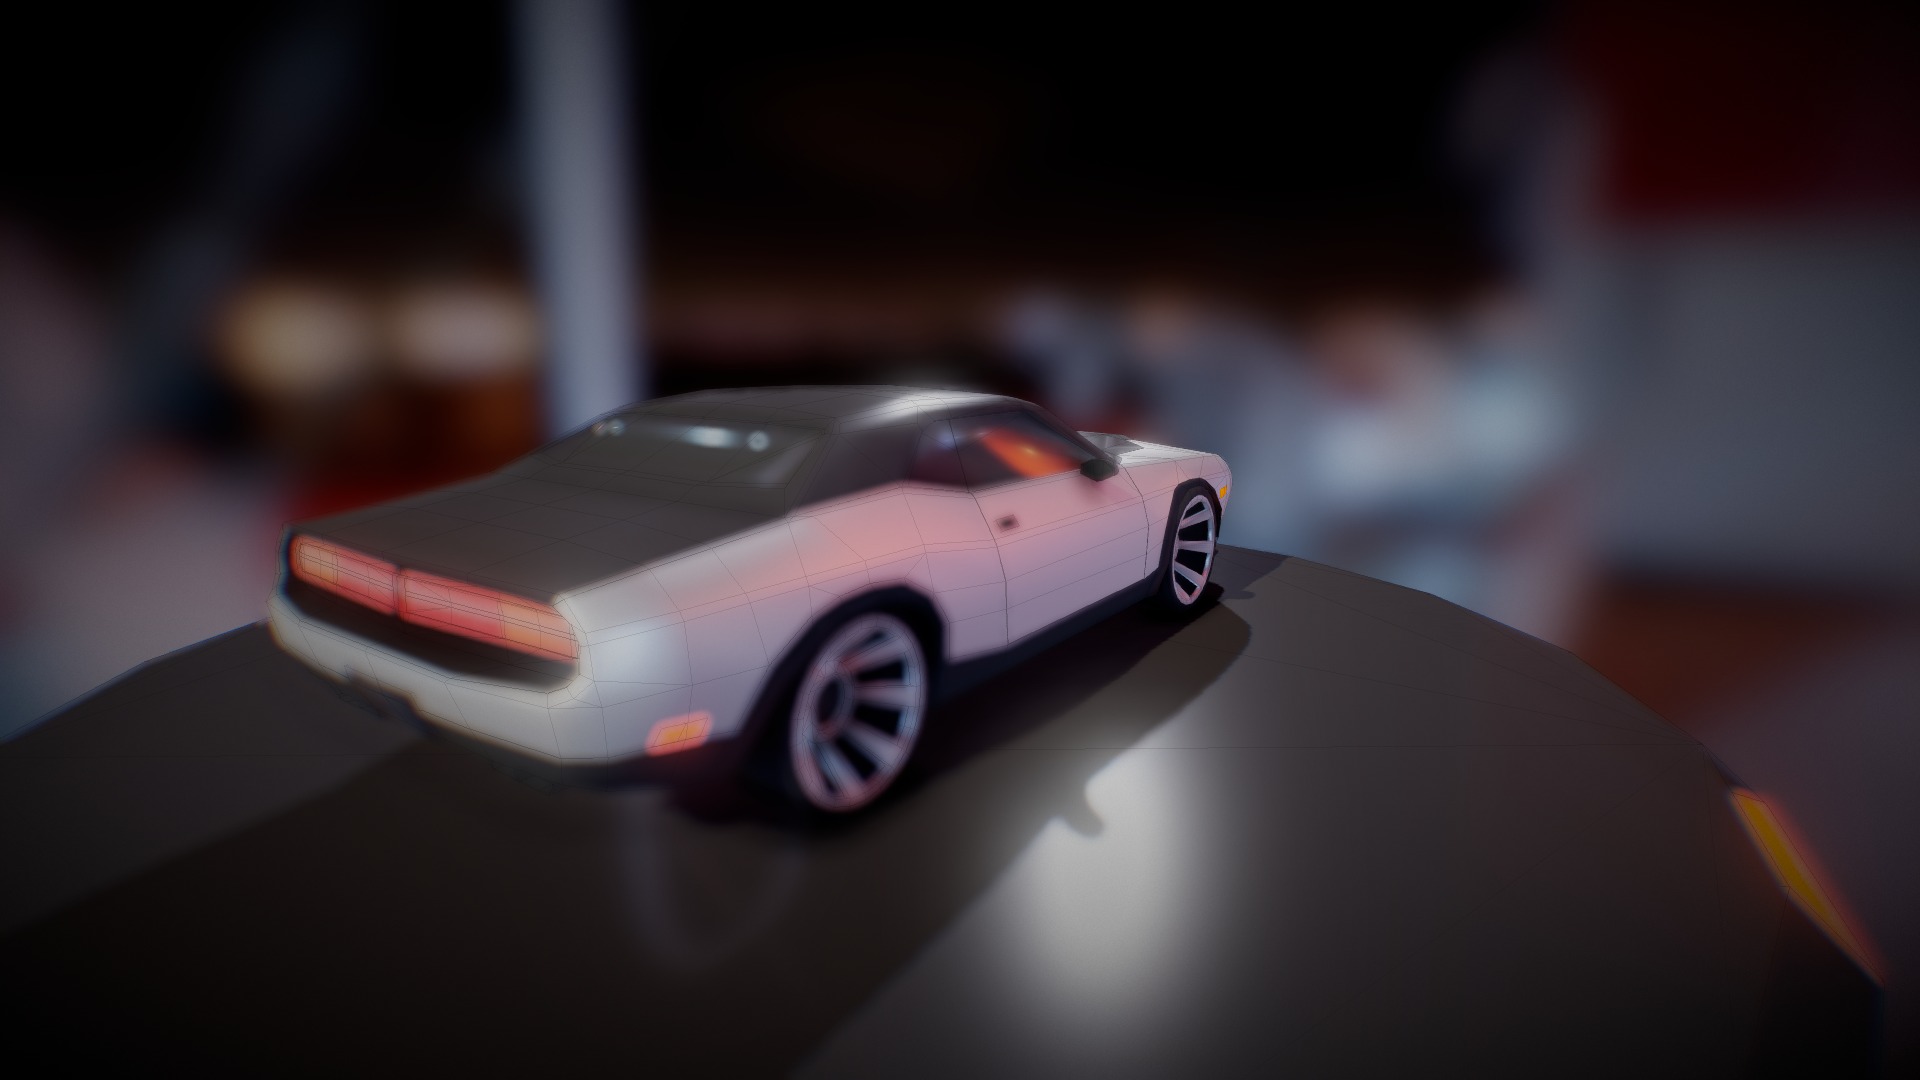 3D model LOWPOLY SRT8 - This is a 3D model of the LOWPOLY SRT8. The 3D model is about a white and red sports car.